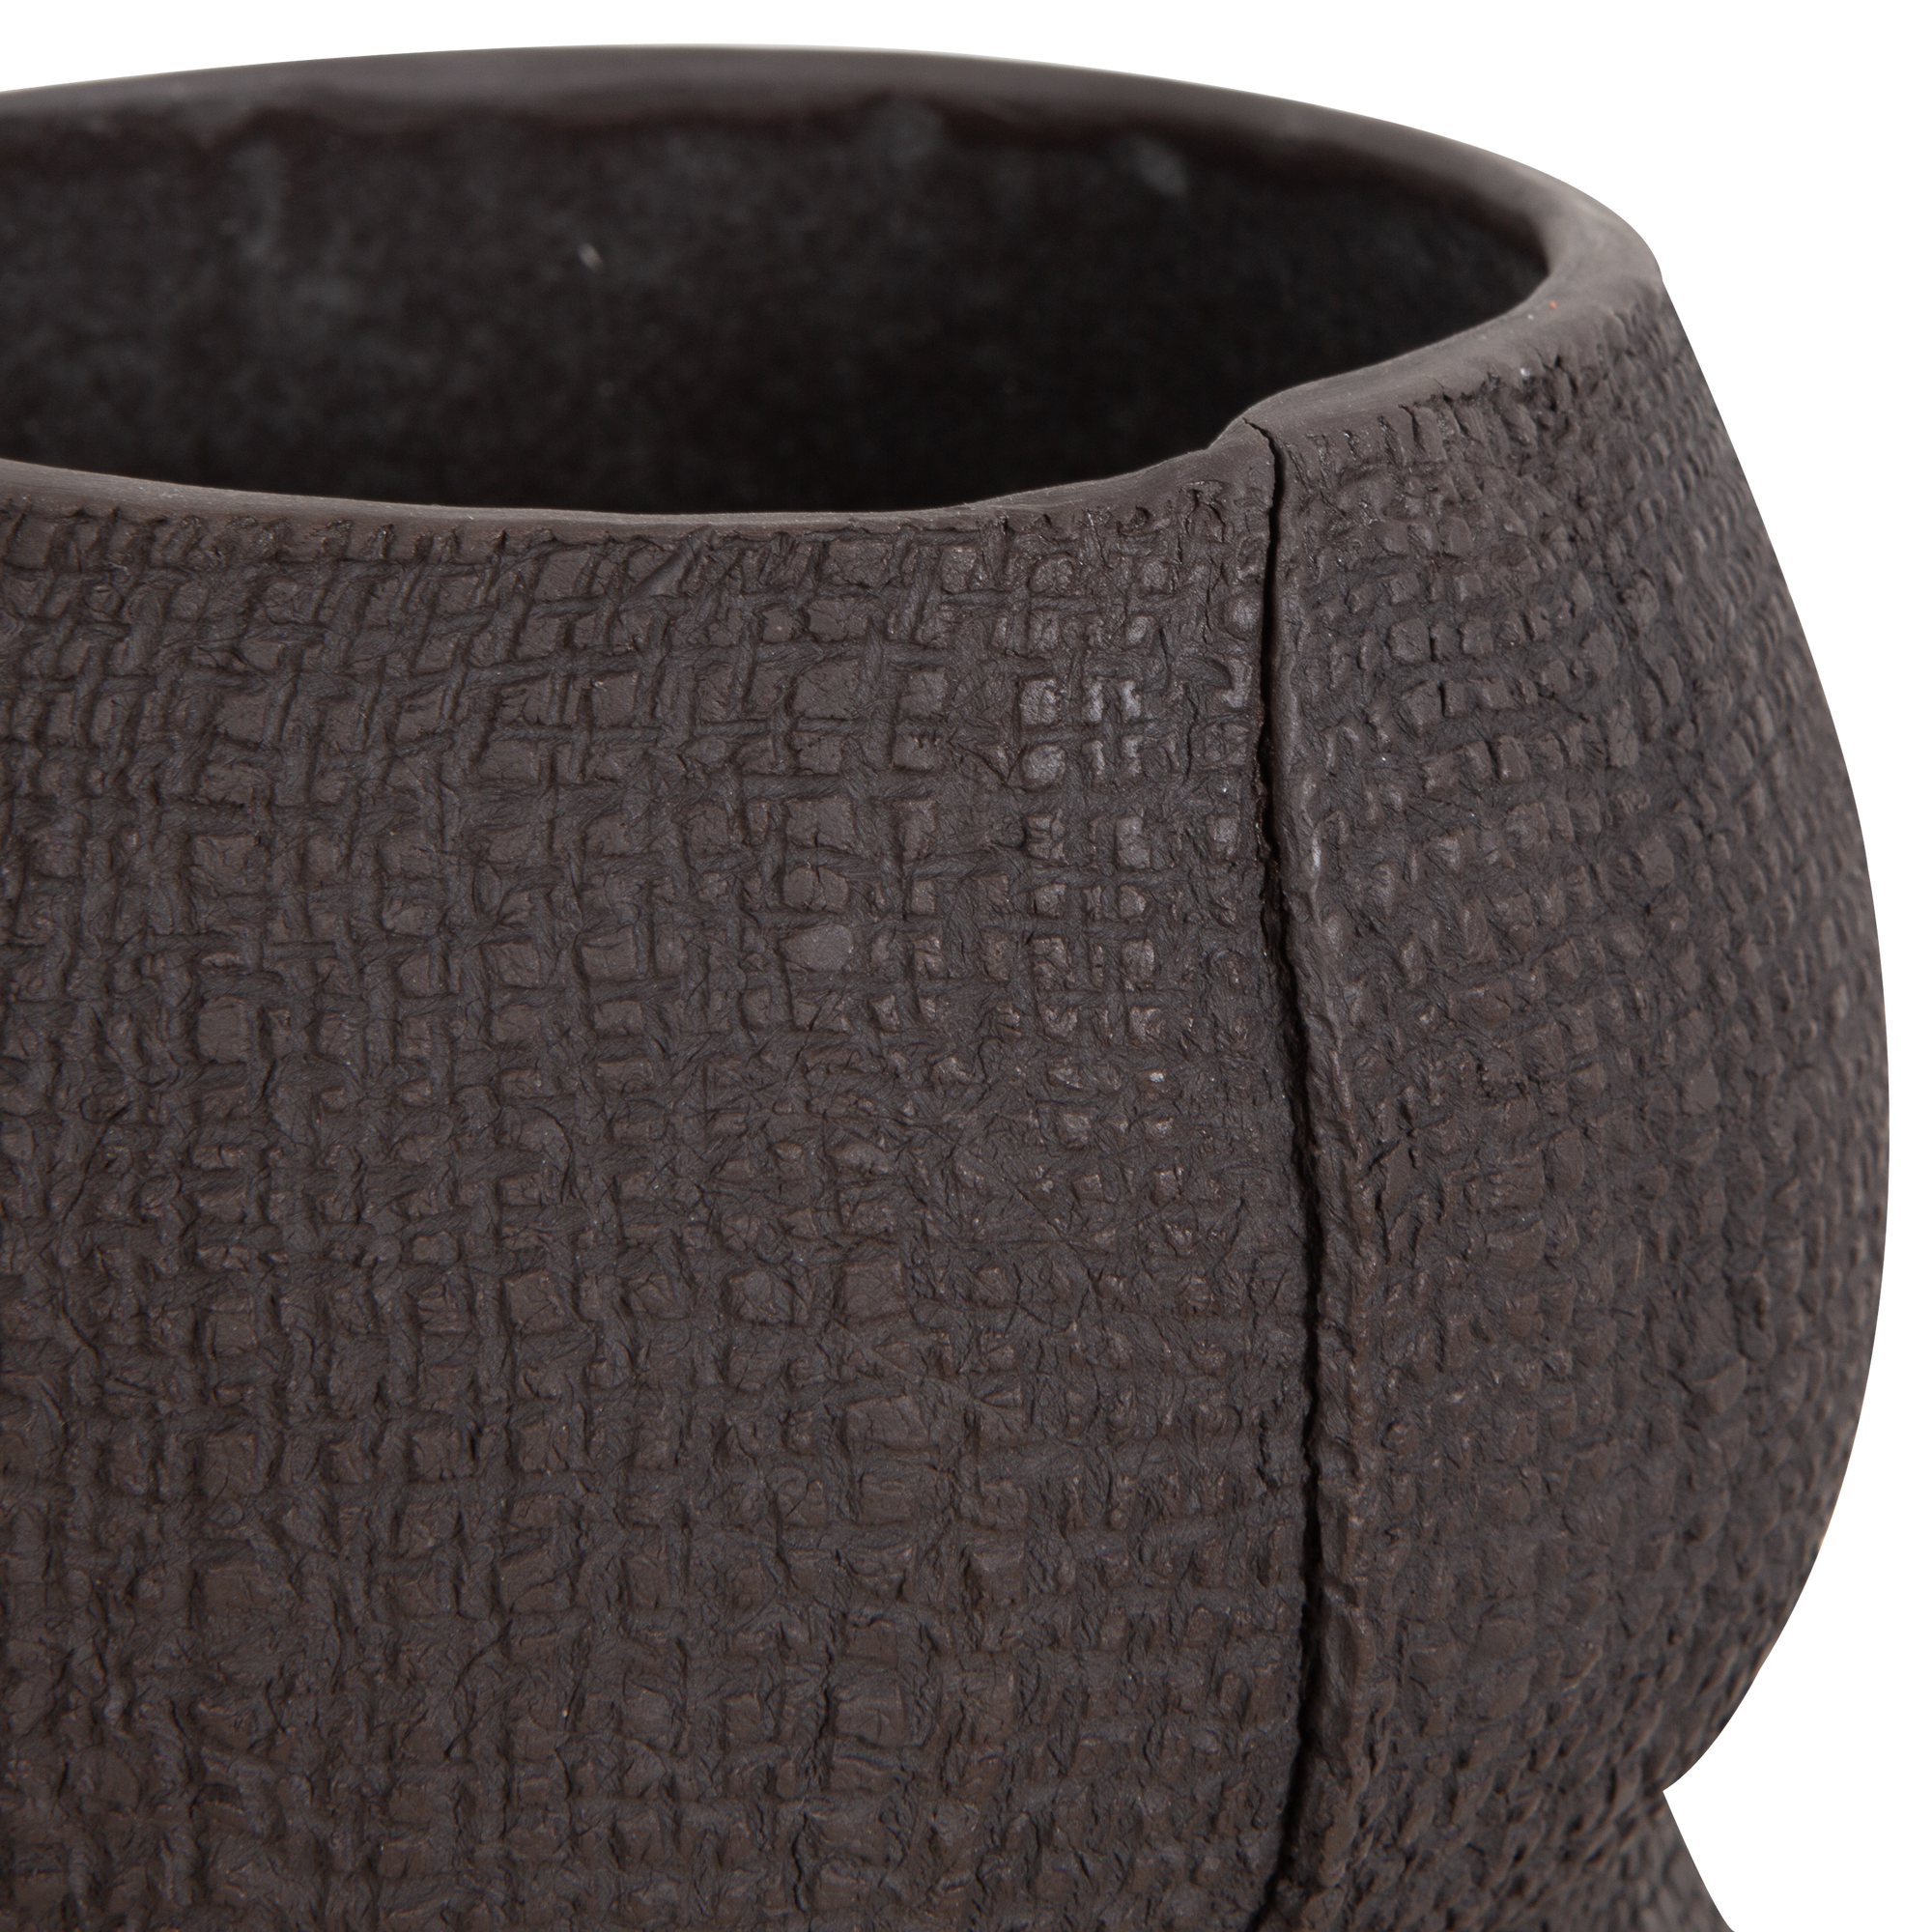 Drawing from human forms and using soft rounded lines, the Burlap Curvy Vase is uniquely textured and this intentionally imperfect vase was handcrafted using vitreous high-fire, pu